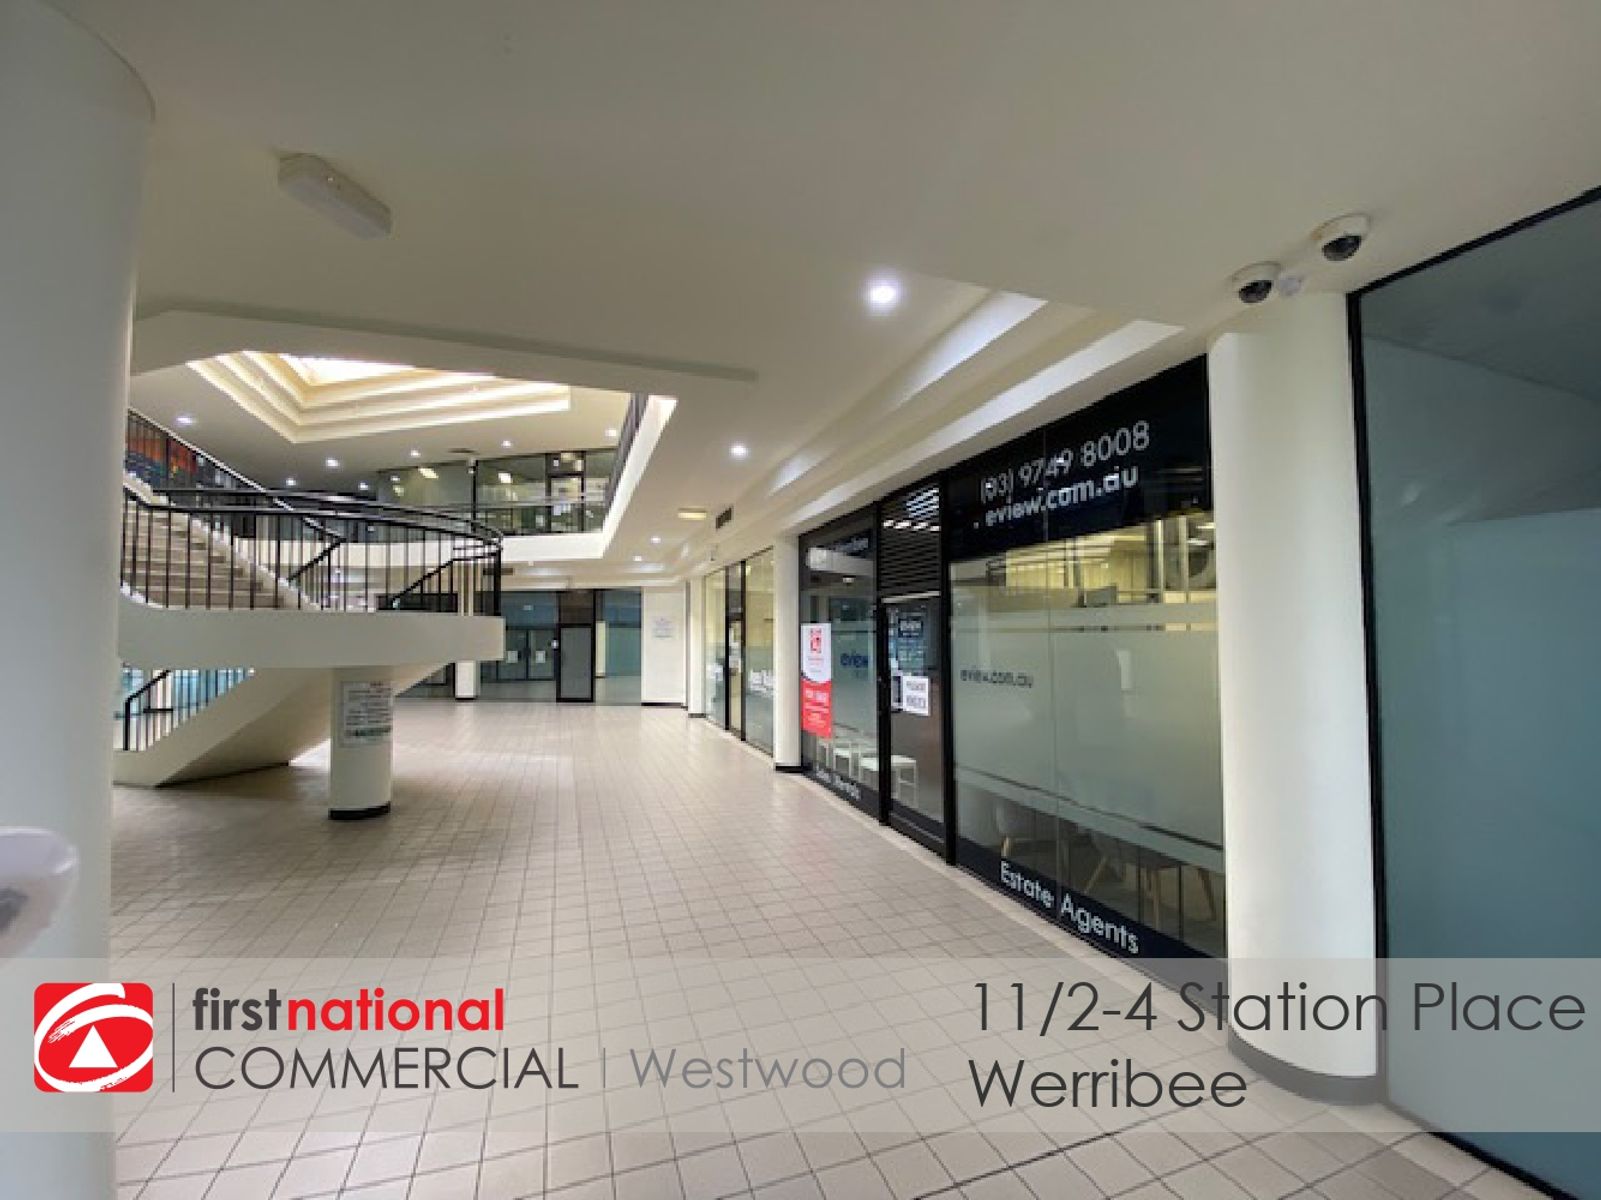 11/2-14 Station Place, Werribee, VIC 3030